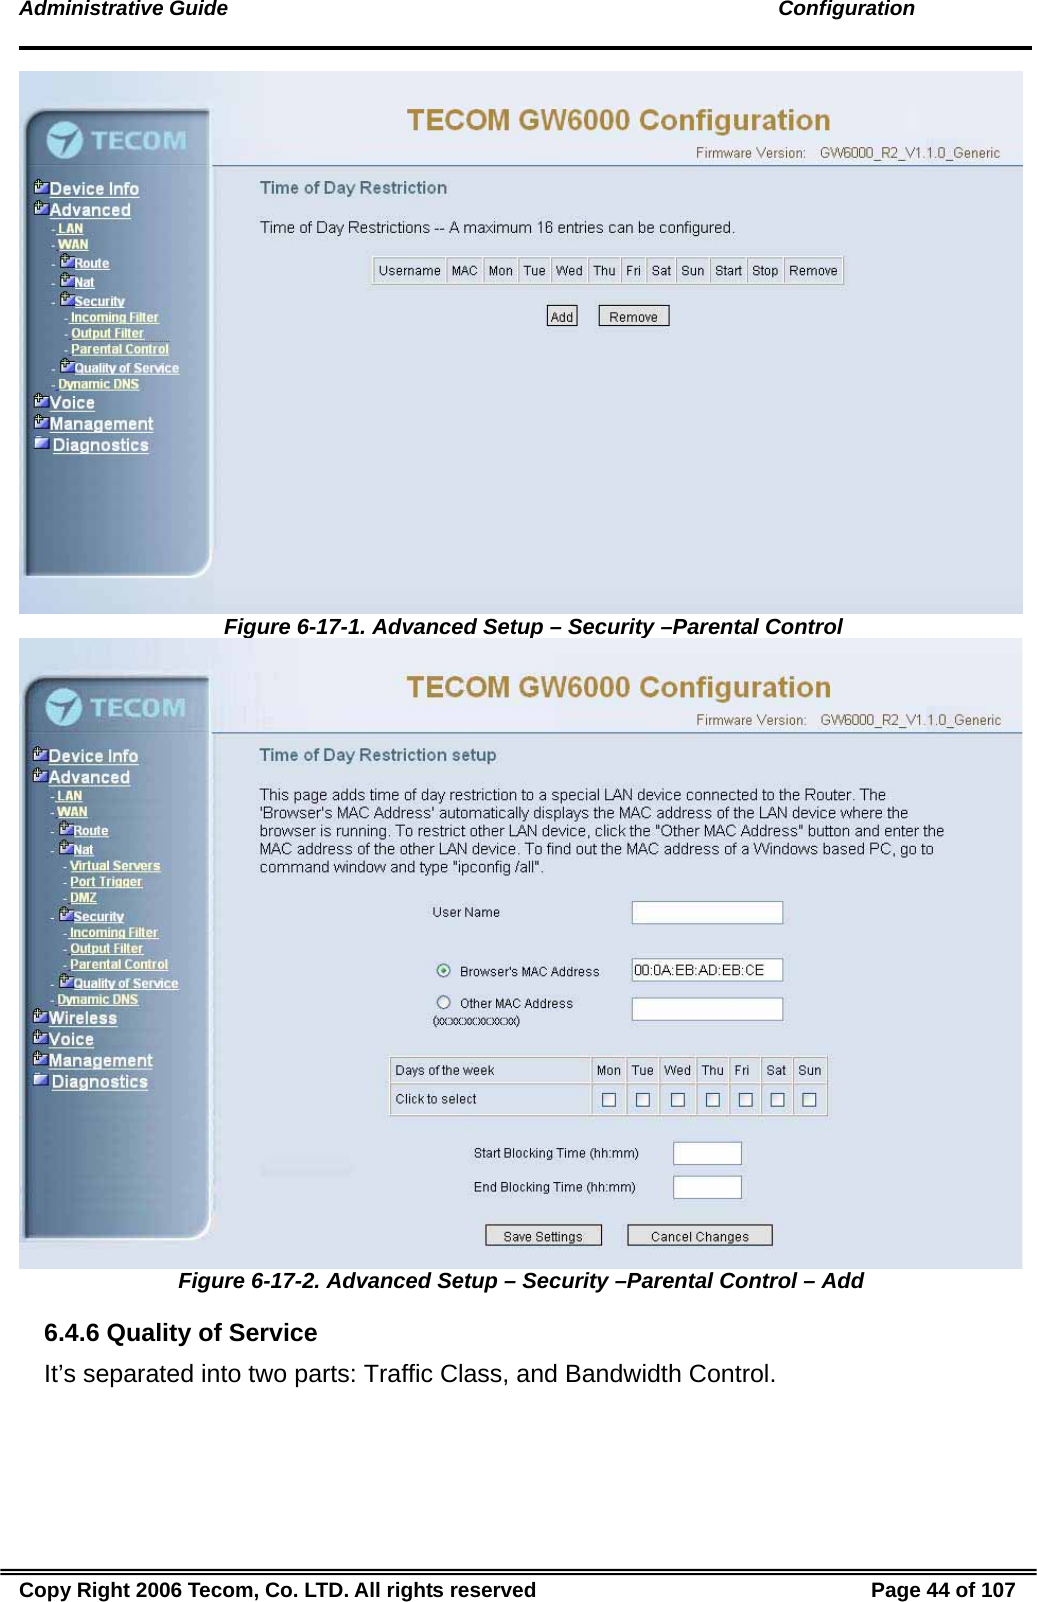 Administrative Guide                                                                                               Configuration  Figure 6-17-1. Advanced Setup – Security –Parental Control  Figure 6-17-2. Advanced Setup – Security –Parental Control – Add 6.4.6 Quality of Service It’s separated into two parts: Traffic Class, and Bandwidth Control. Copy Right 2006 Tecom, Co. LTD. All rights reserved  Page 44 of 107 